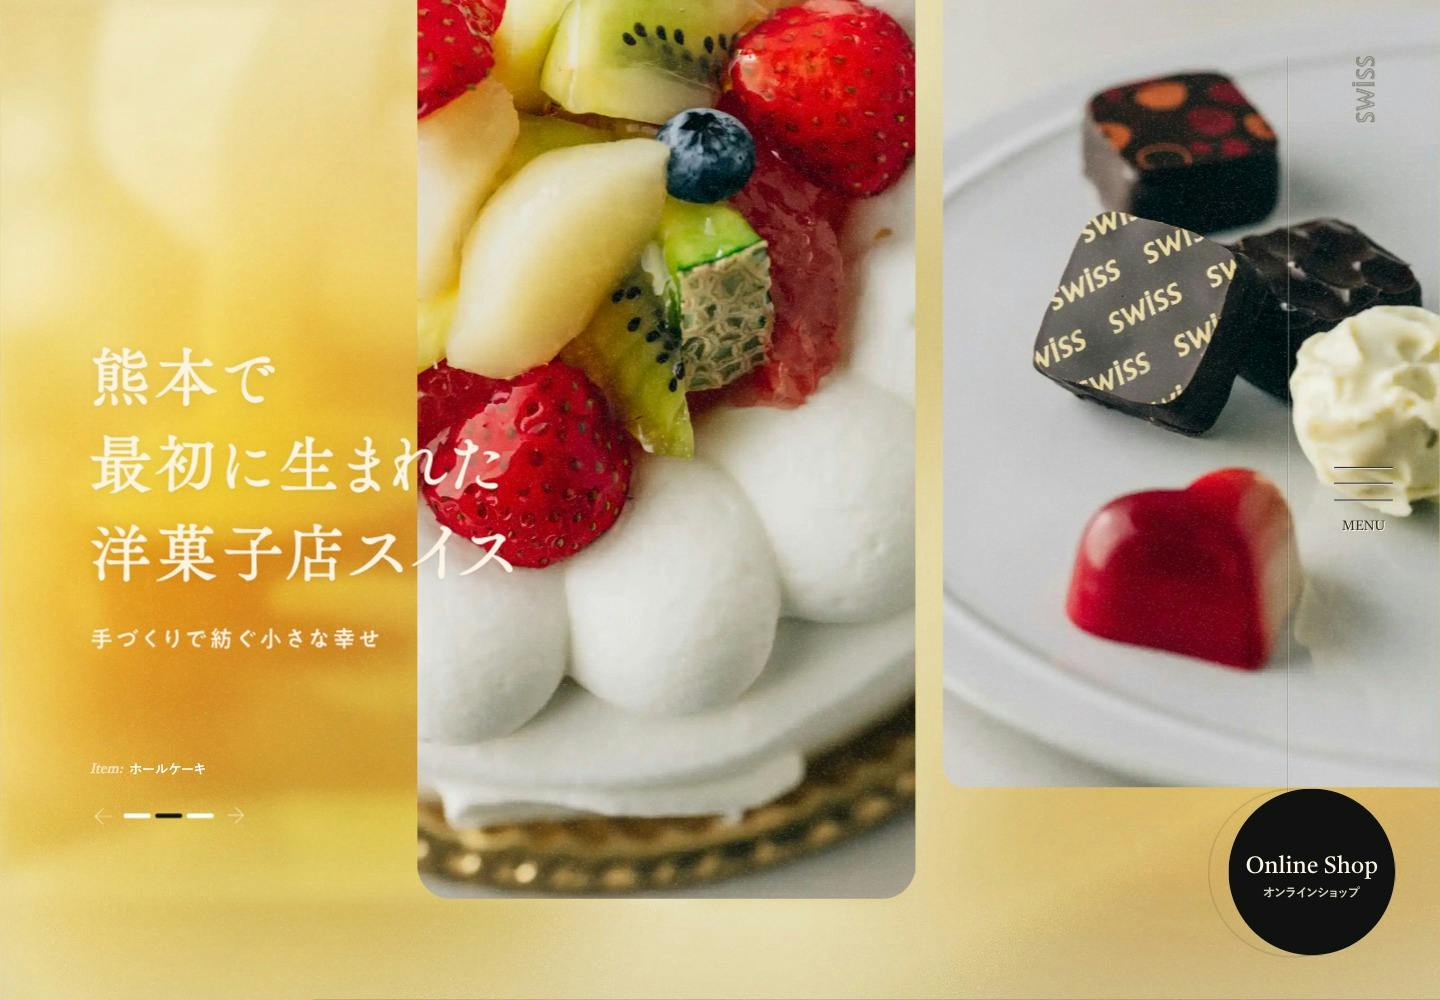 Cover Image for SWISS洋菓子店